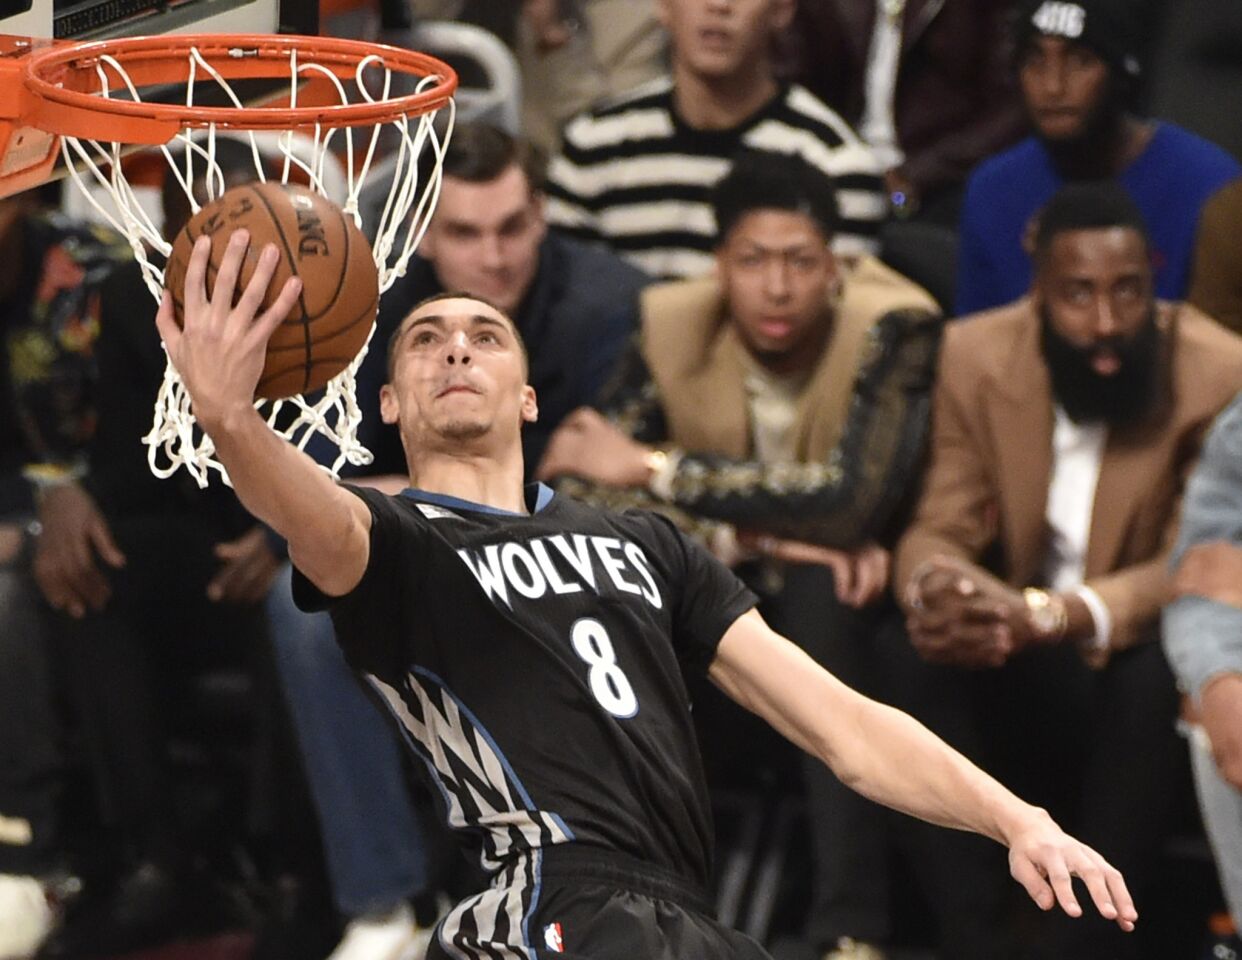 Timberwolves guard Zach LaVine attempts a reverse dunk during the contest Saturday in Toronto.